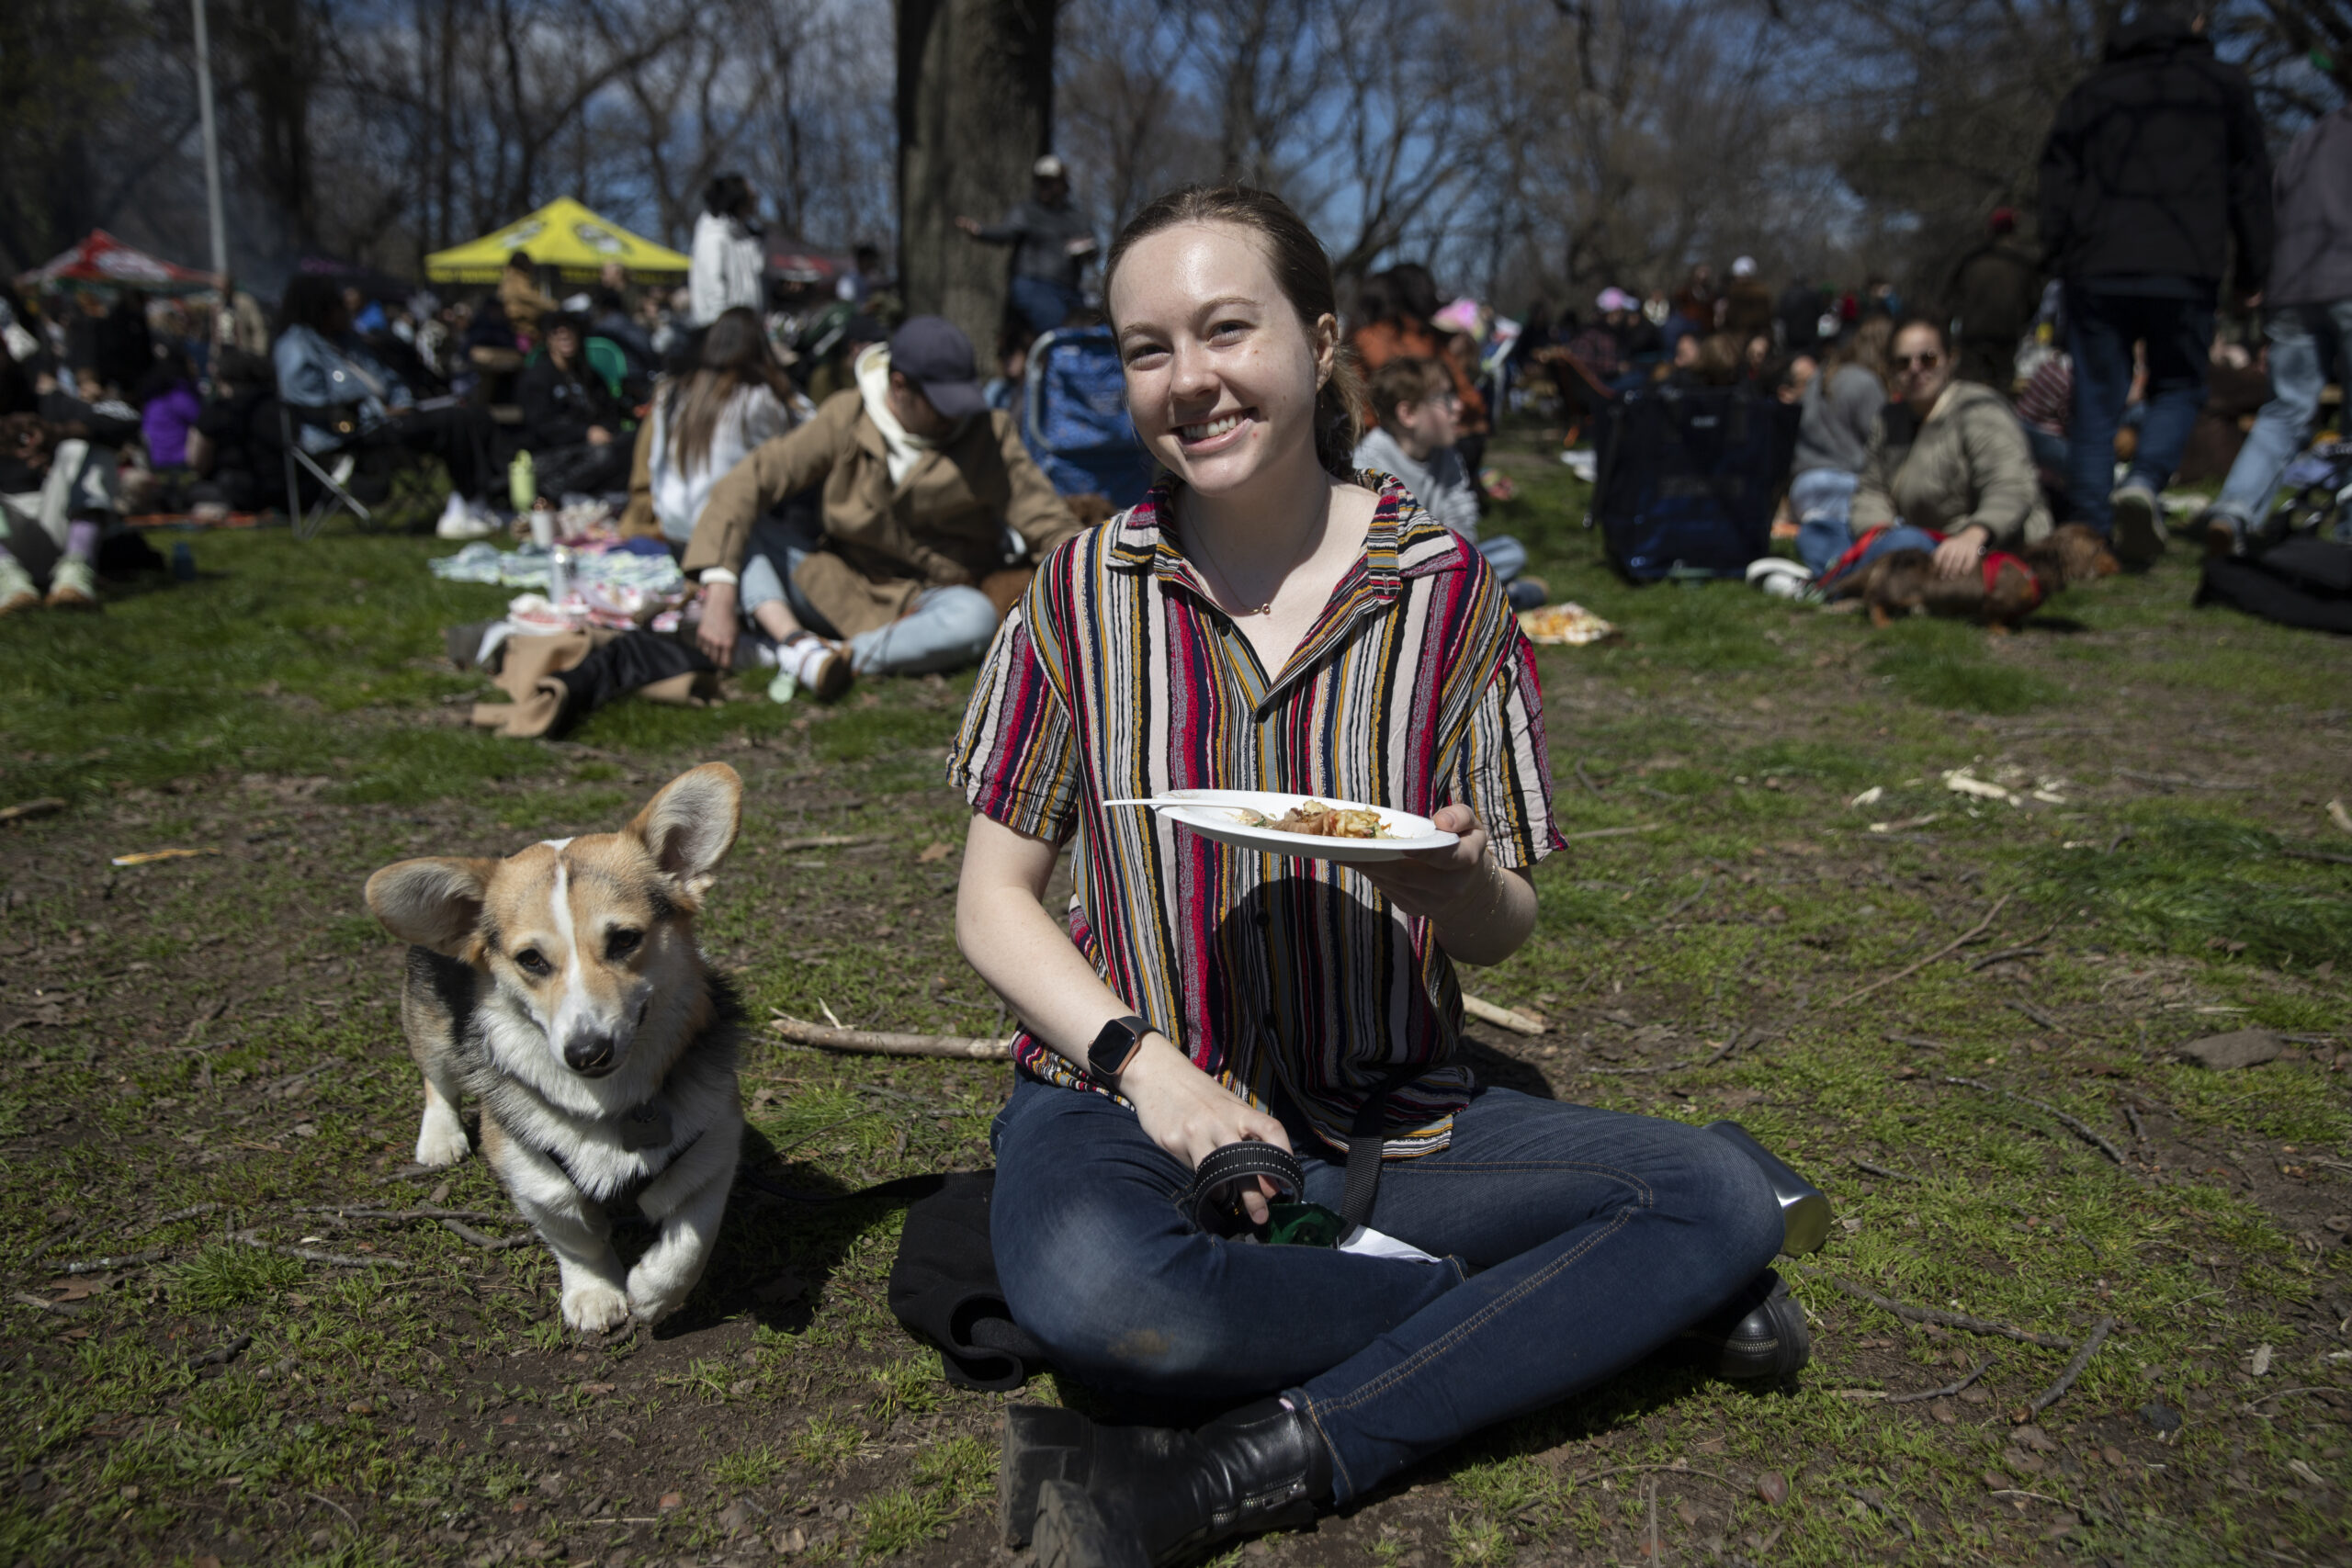 Leigh Blanchard with Dog Shiloh at Prospect Park Smorgasburg.